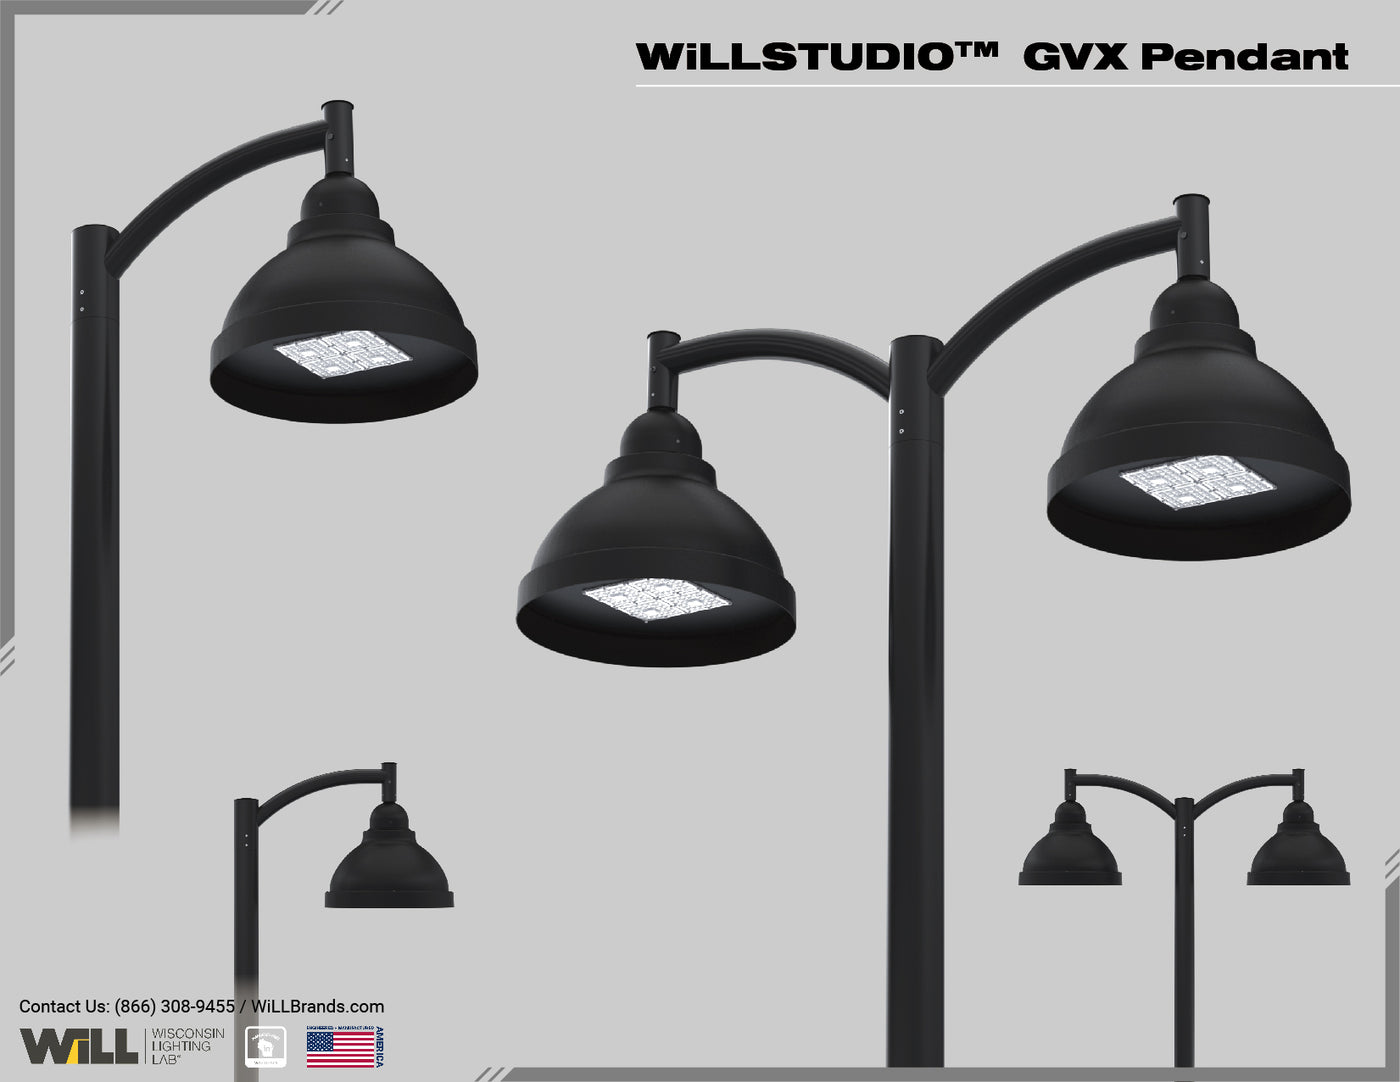 GVX Pendant with Architectural Upsweep Arm